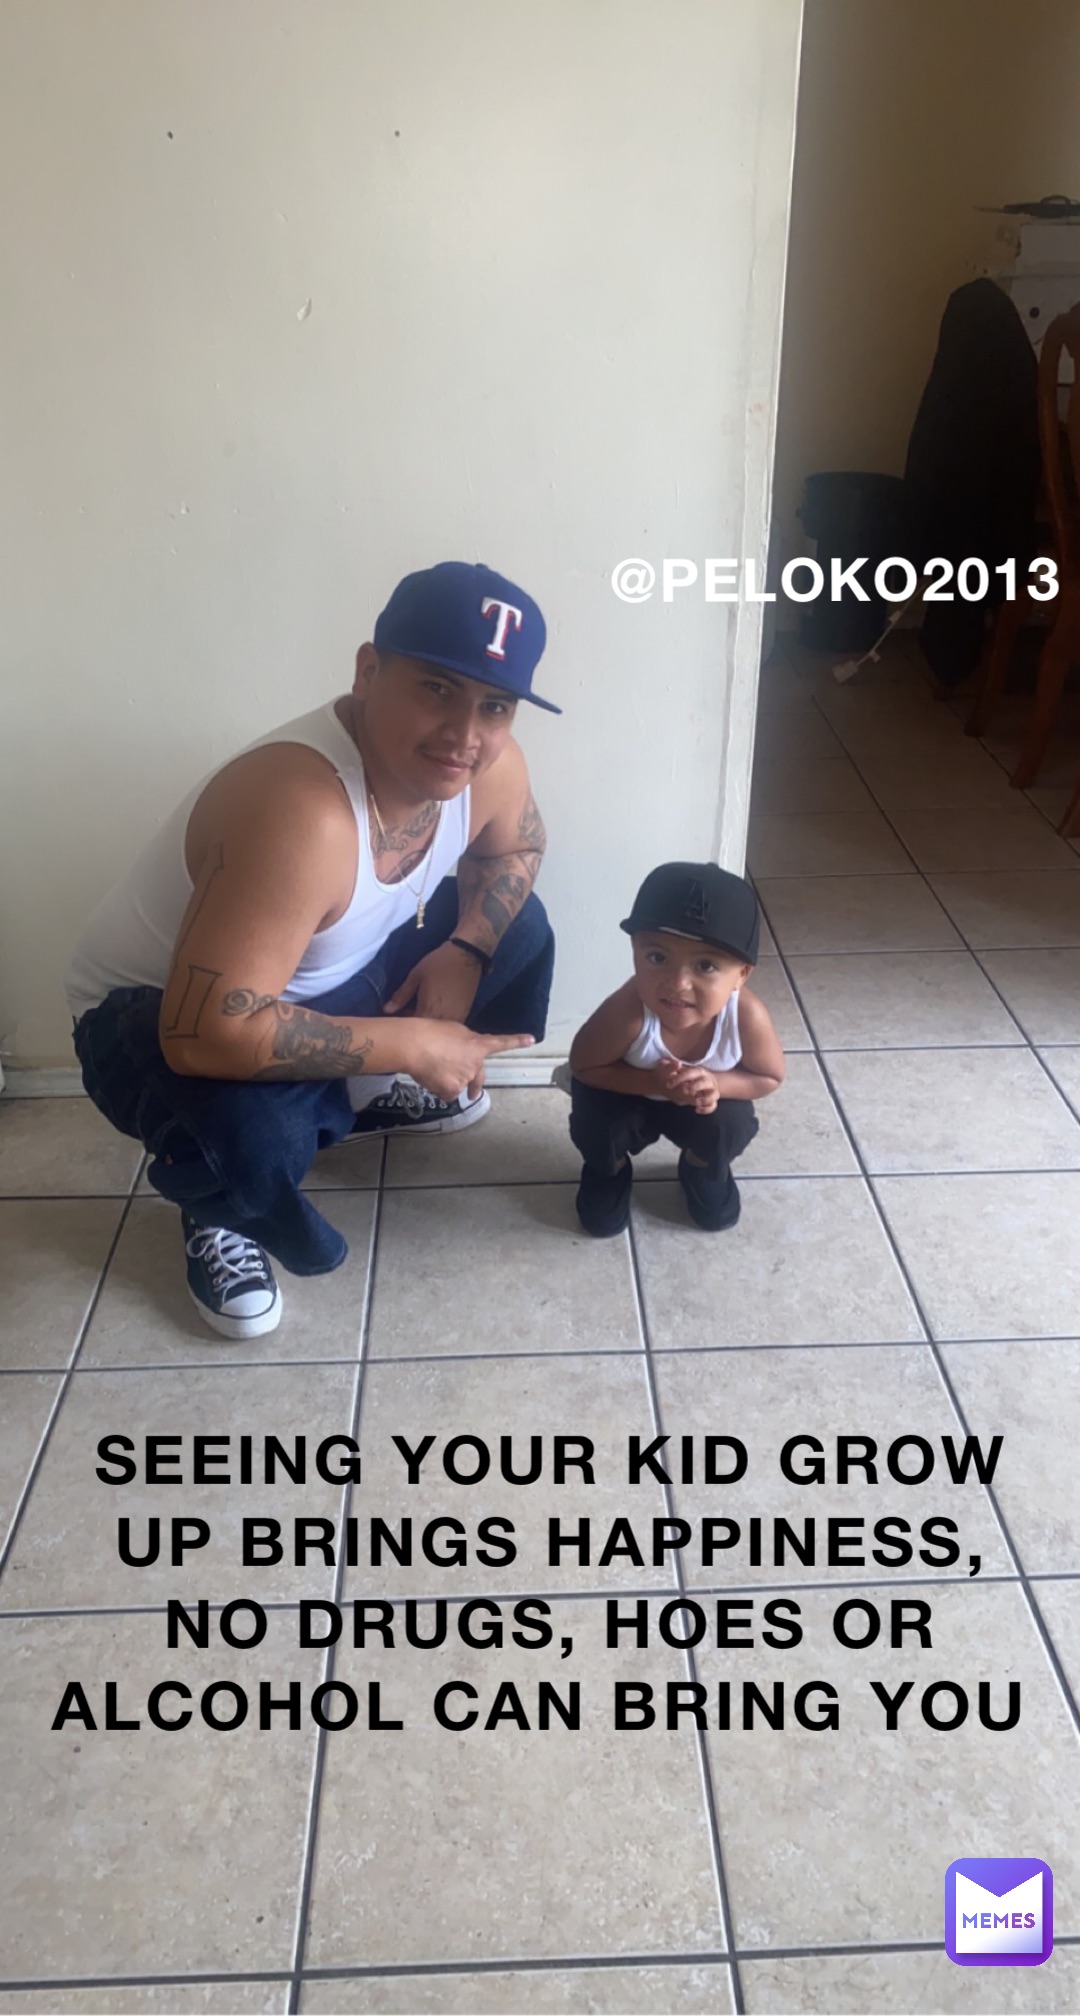 @PELOKO2013 Seeing your kid grow up brings happiness, no drugs, hoes or alcohol can bring you